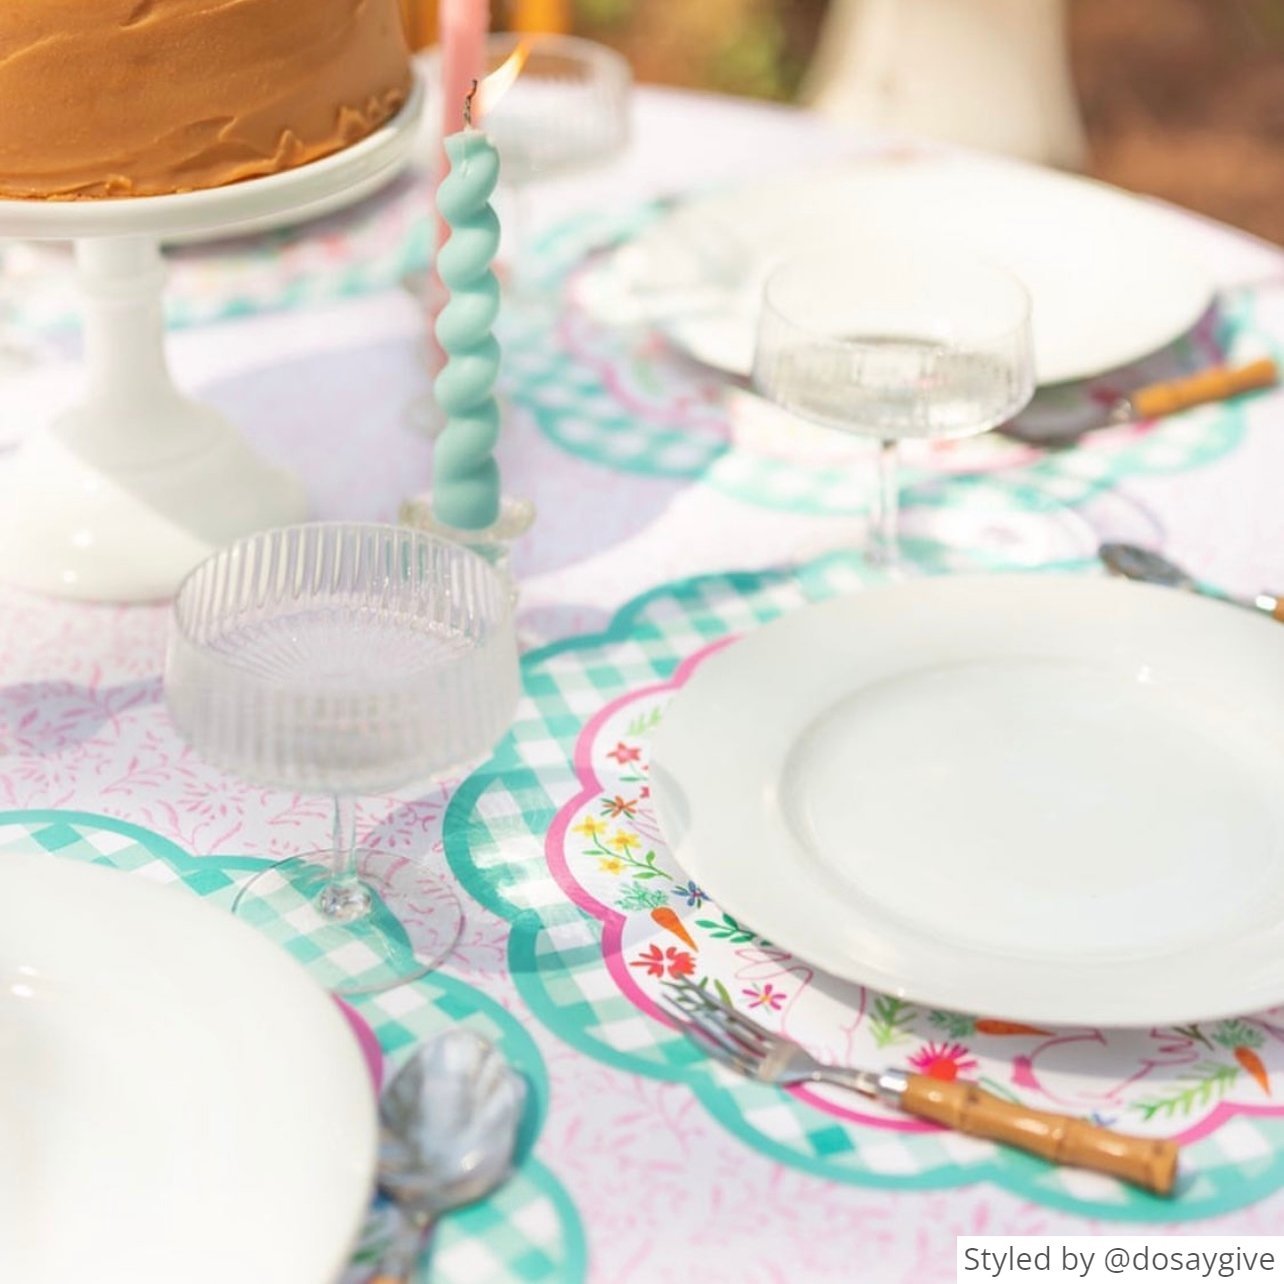 Table setting with a green gingham scalloped round paper placemat layered with a round bunny paper charger and white plate